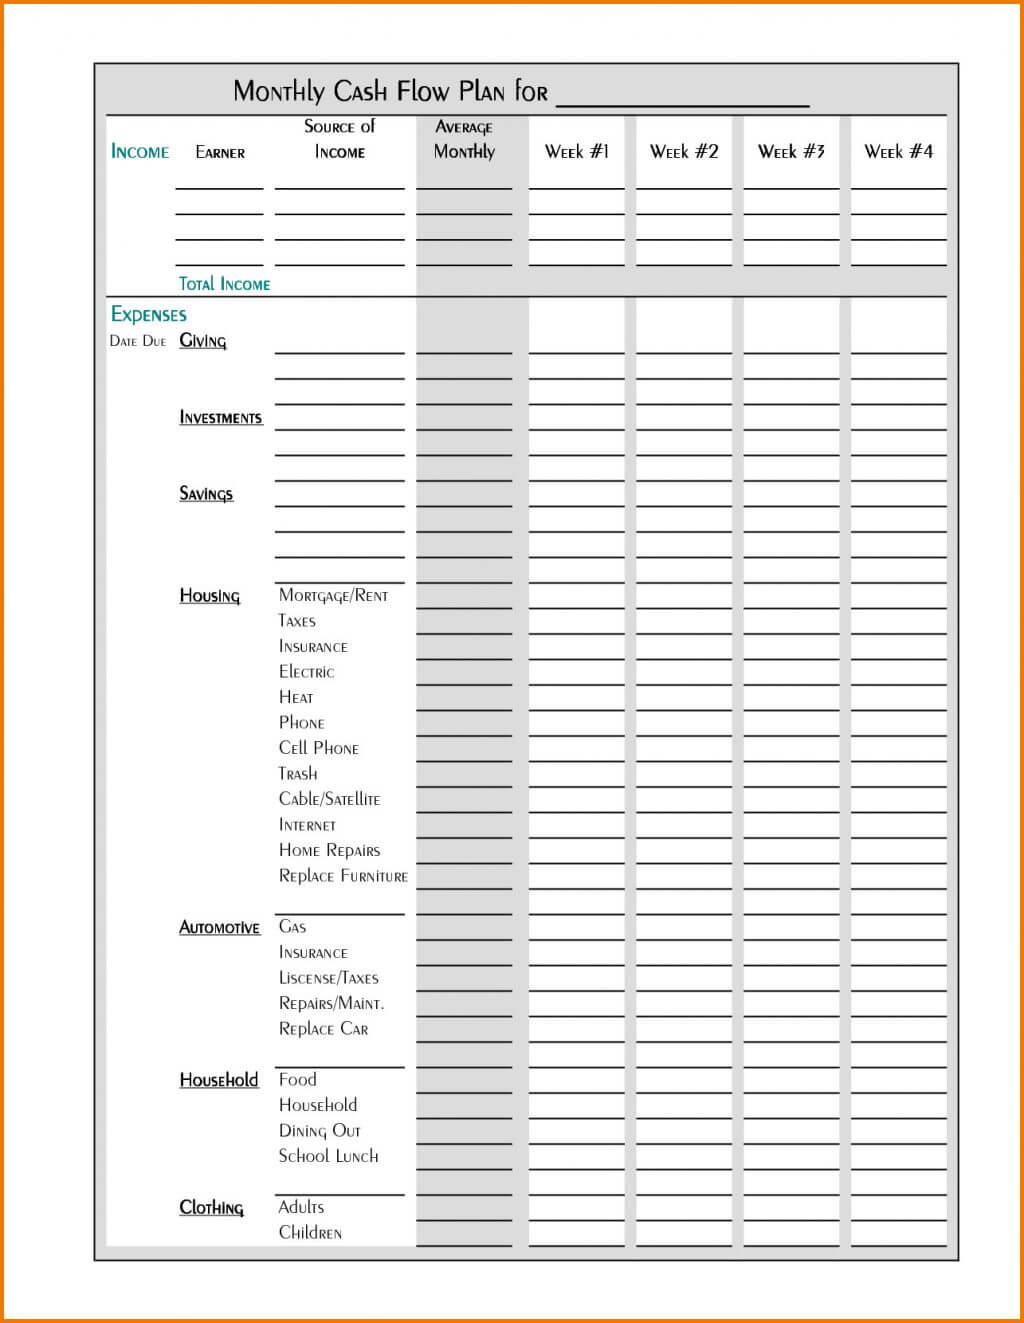 Sample School Budget Spreadsheet Monthly Expense Report Throughout Daily Expense Report Template